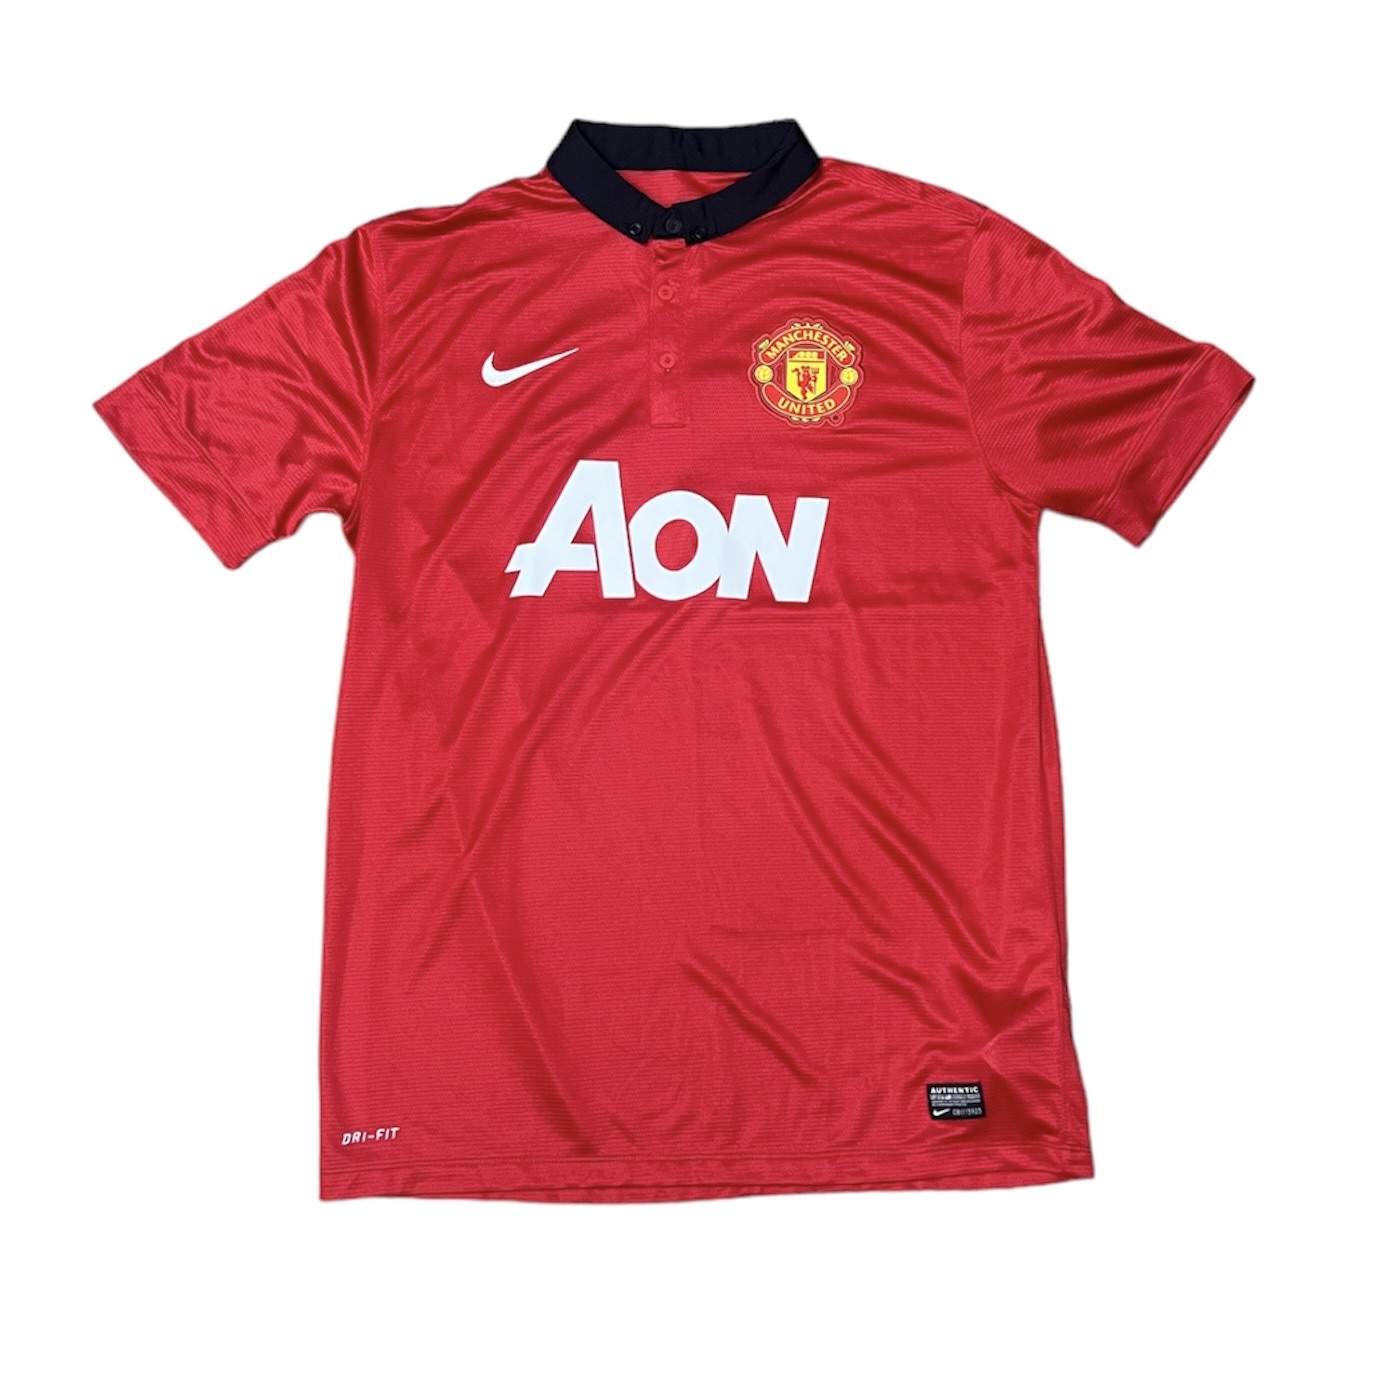 Nike Manchester United 2013/2014 Home Football Jersey